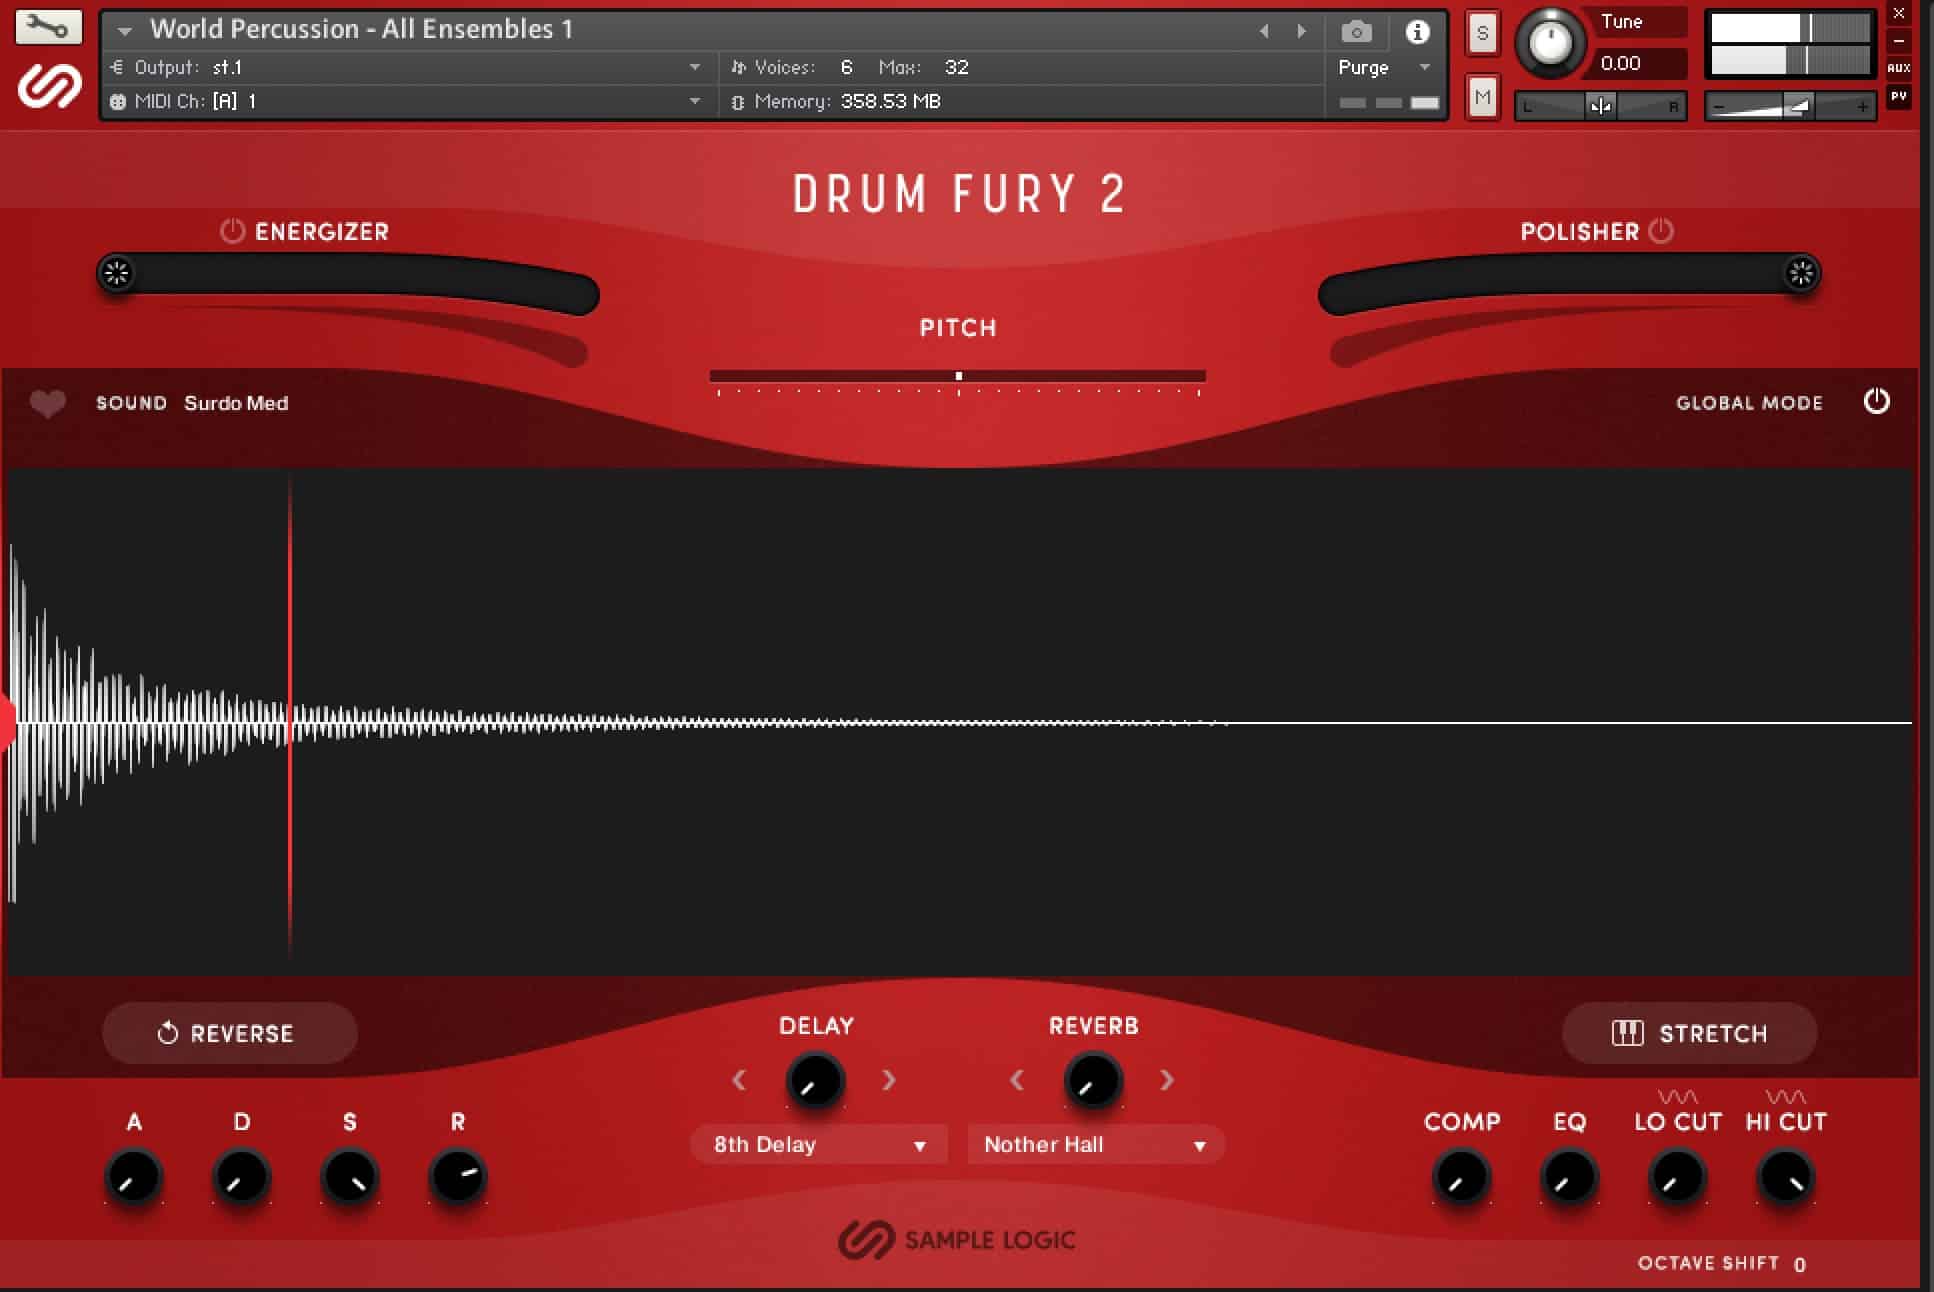 Sample Logic Launches DRUM FURY 2 - Mold & Sculpt Percussion Like Never Before